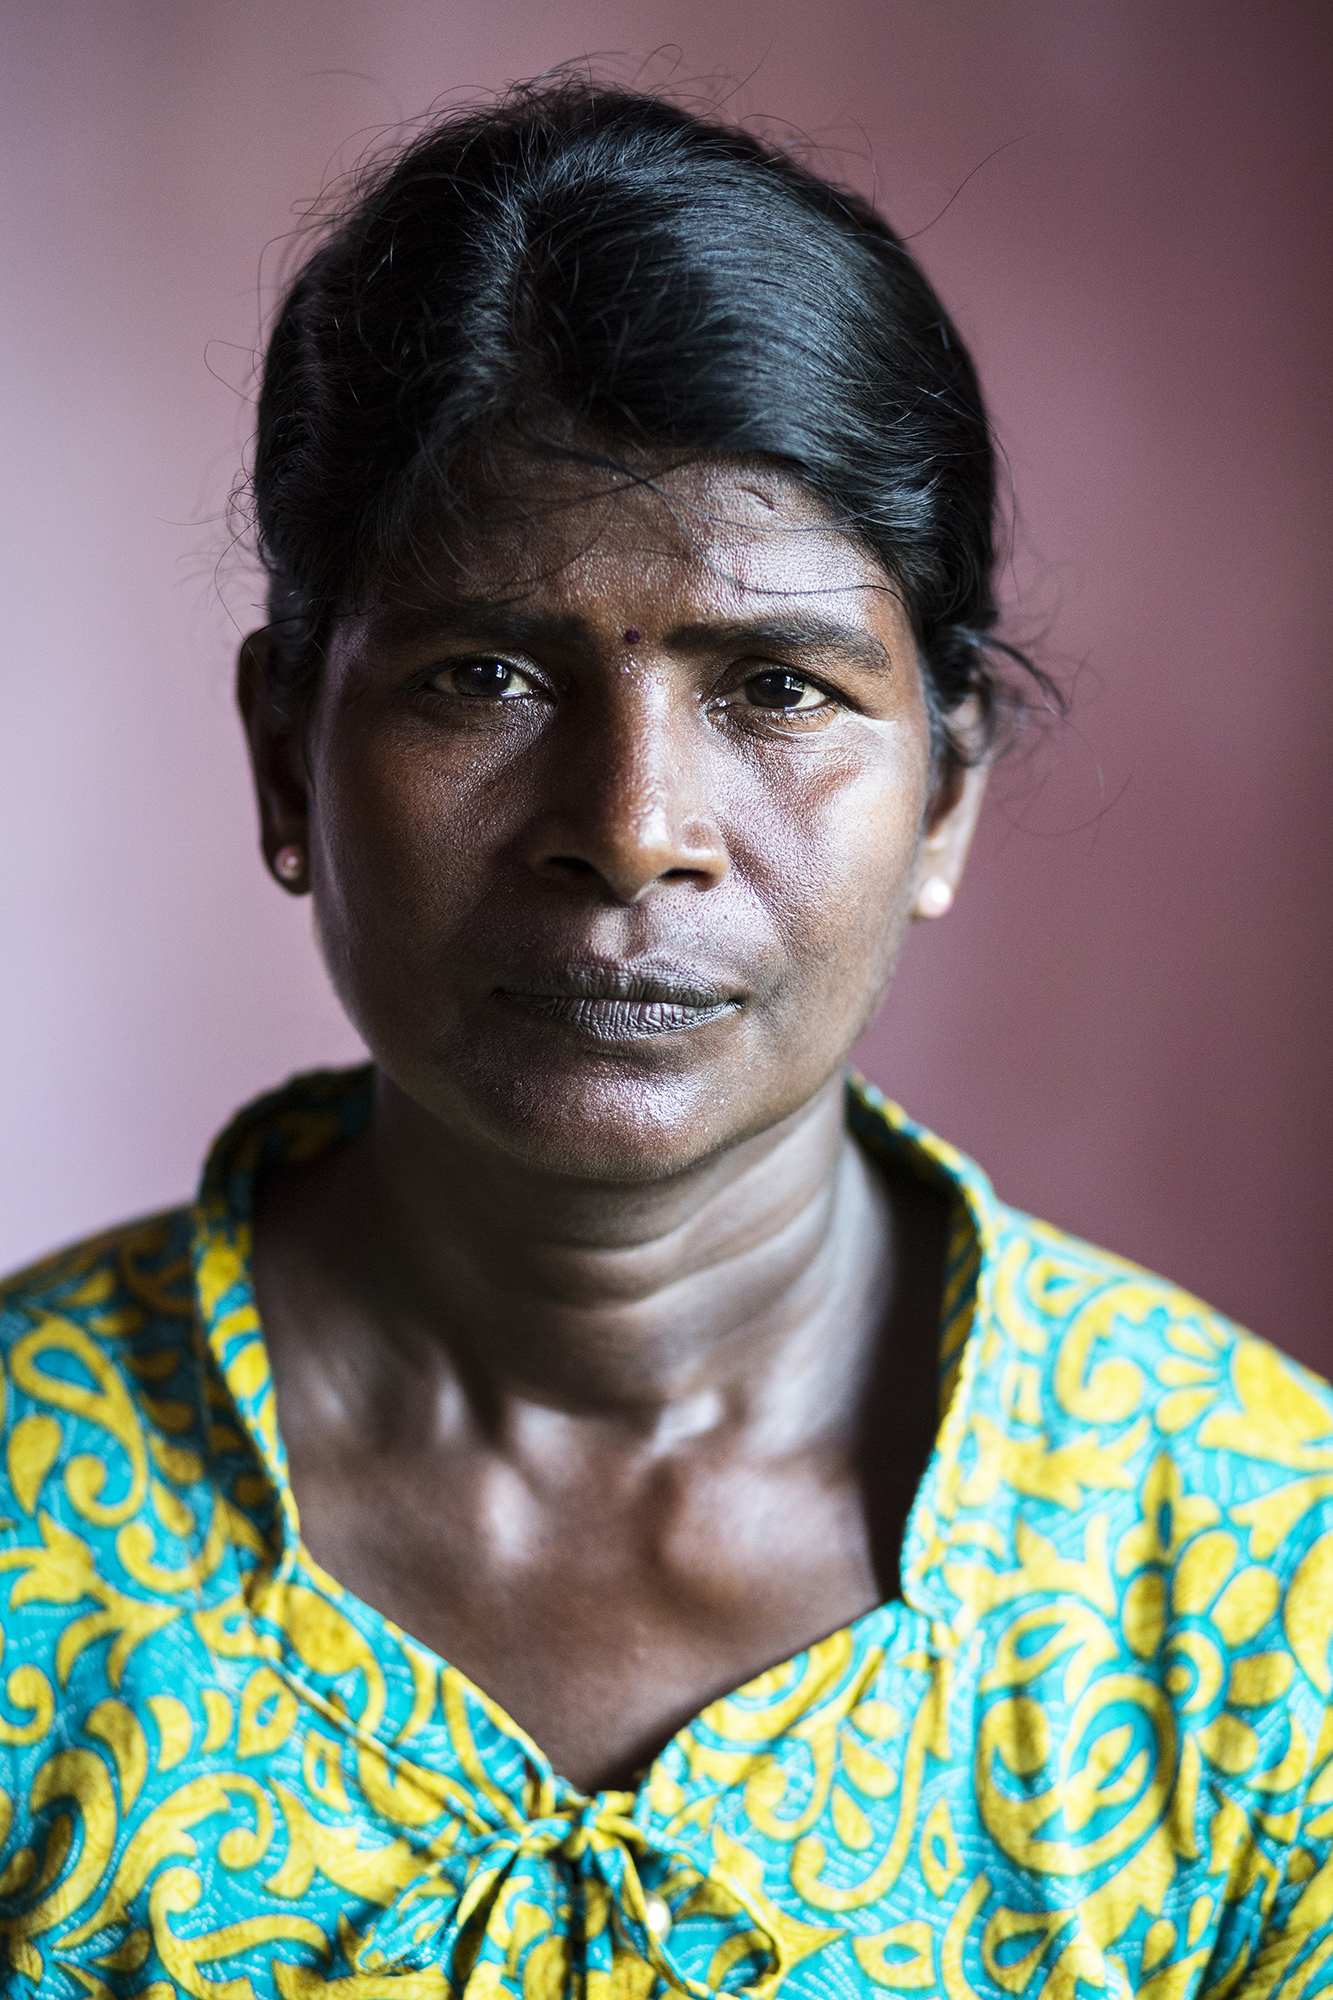  Iruthayarani fears the presence of the Sri Lankan army, and recounts experiences of soldiers following her in daylight and threatening her and her son.  There are tens of thousands of women who have been widowed by the war, making them more vulnerab